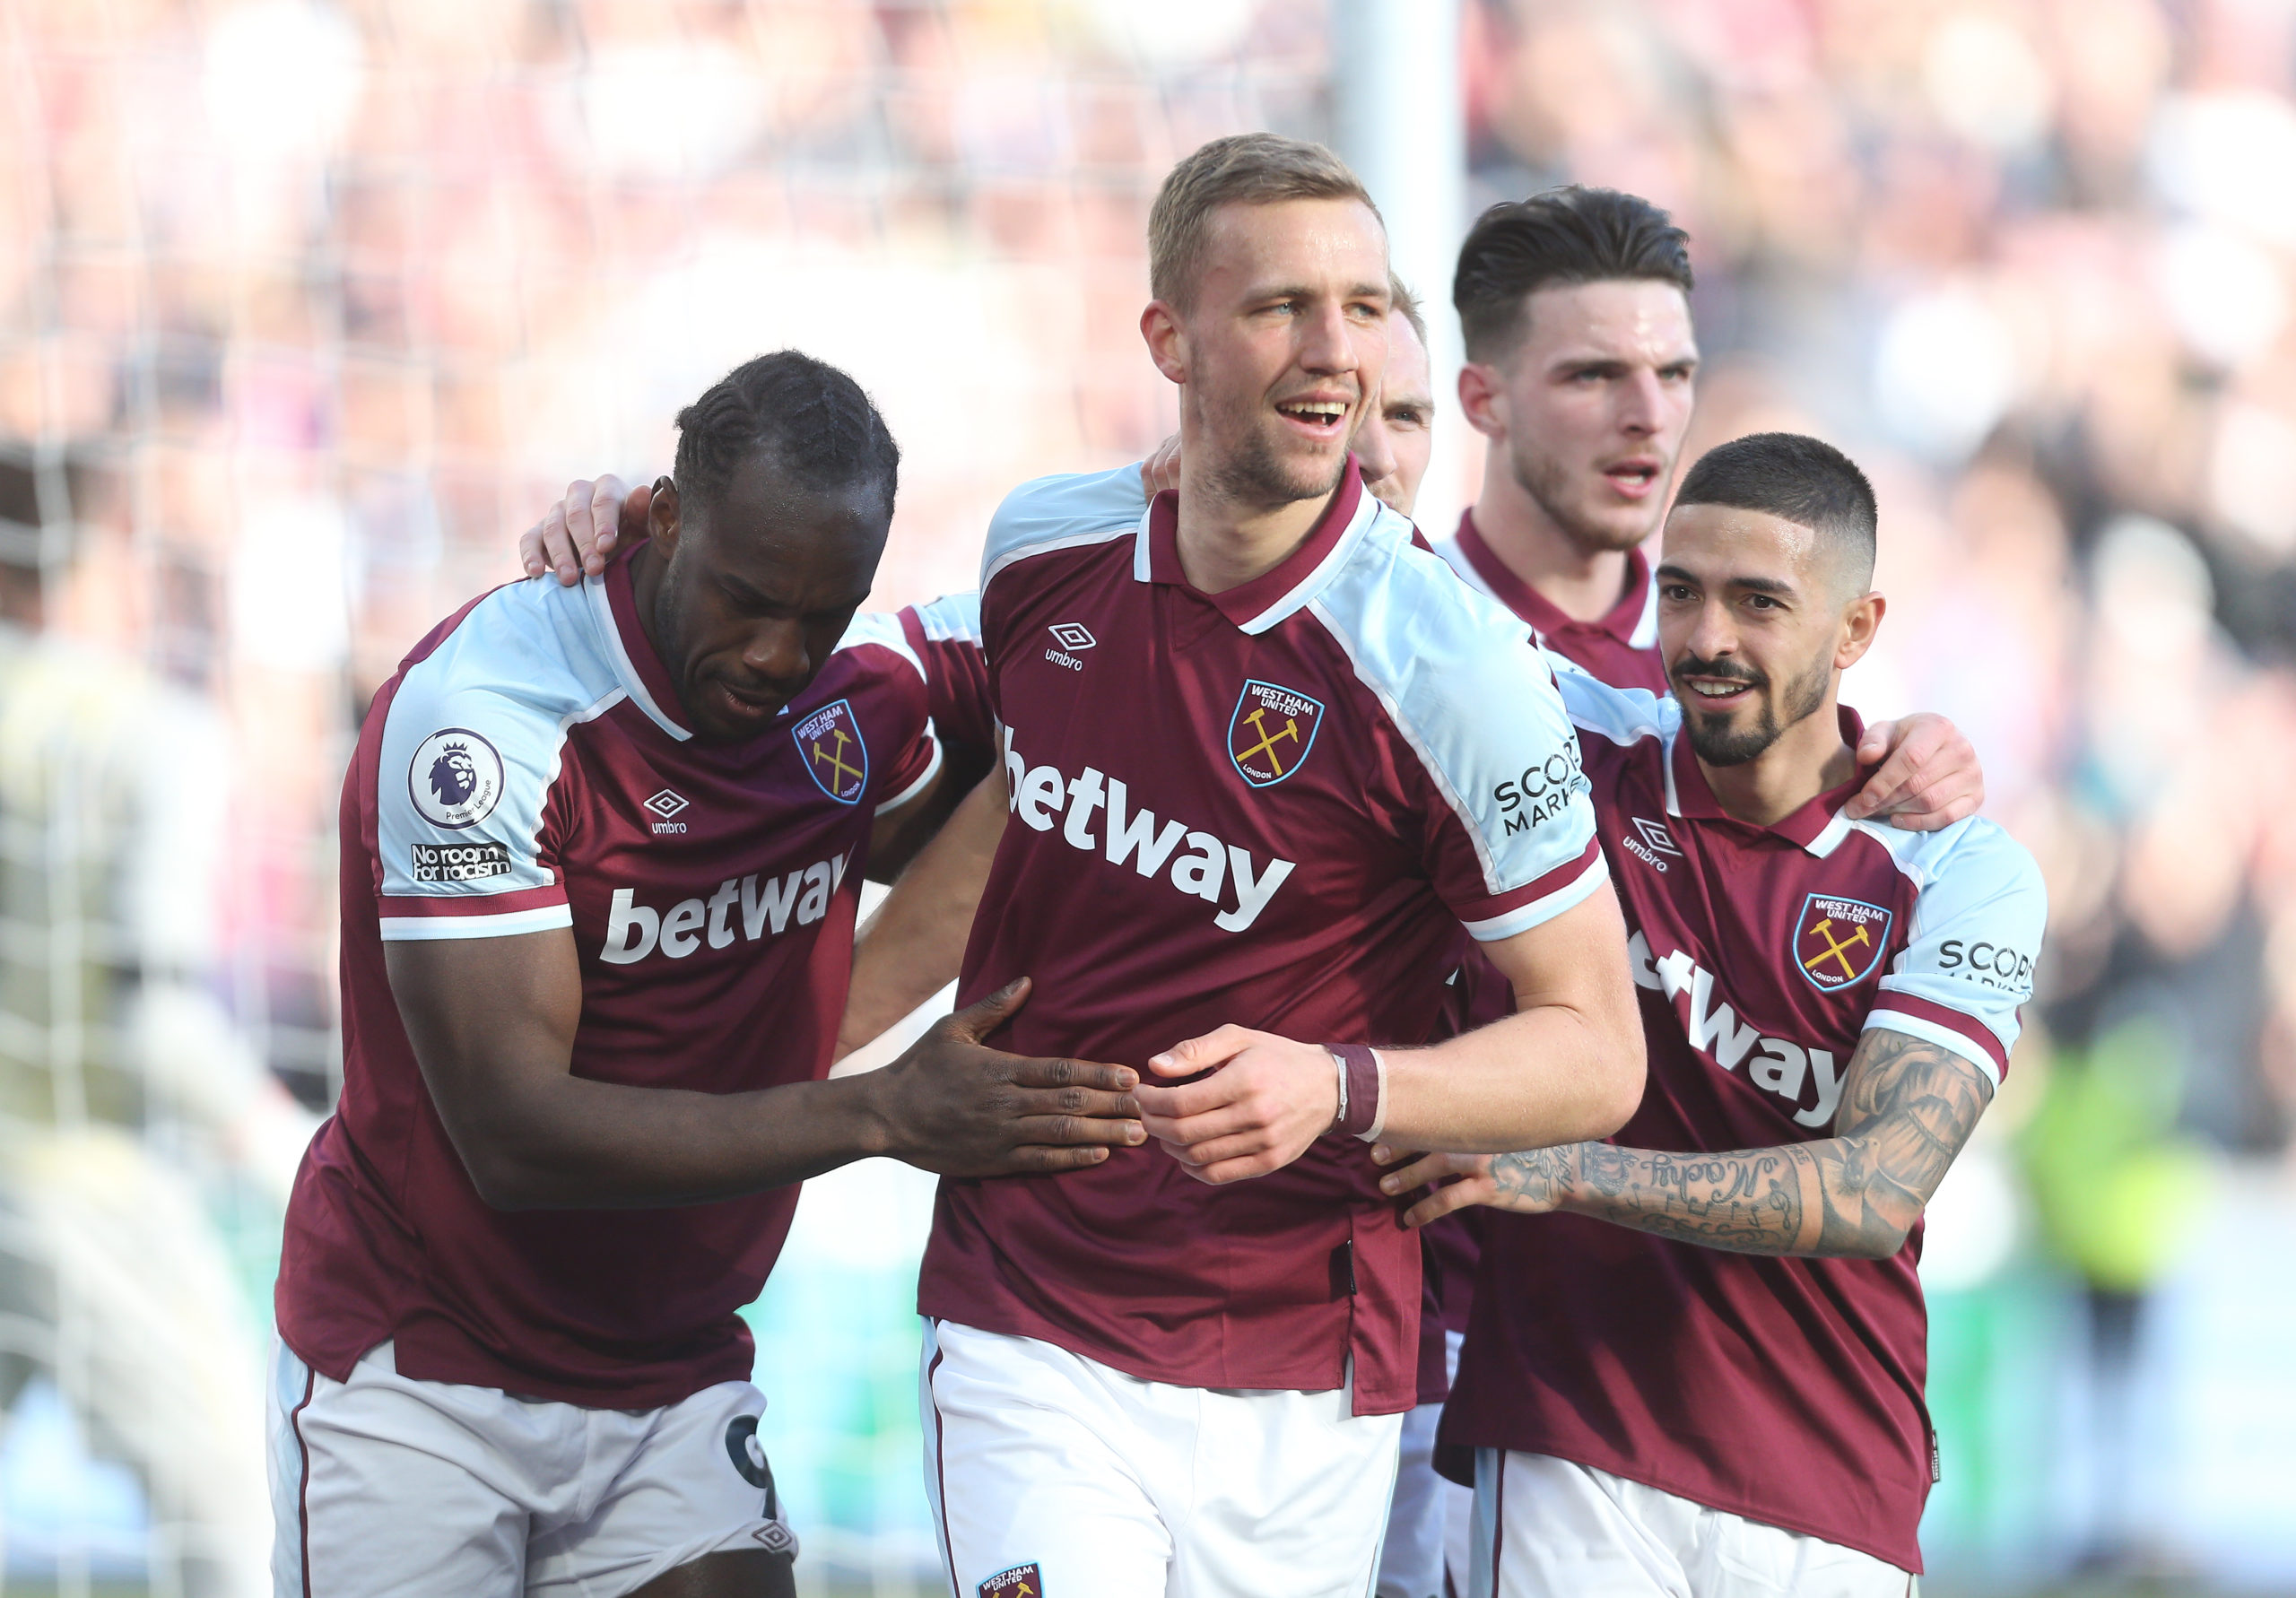 March madness begins as West Ham face one of the most important months in their modern history